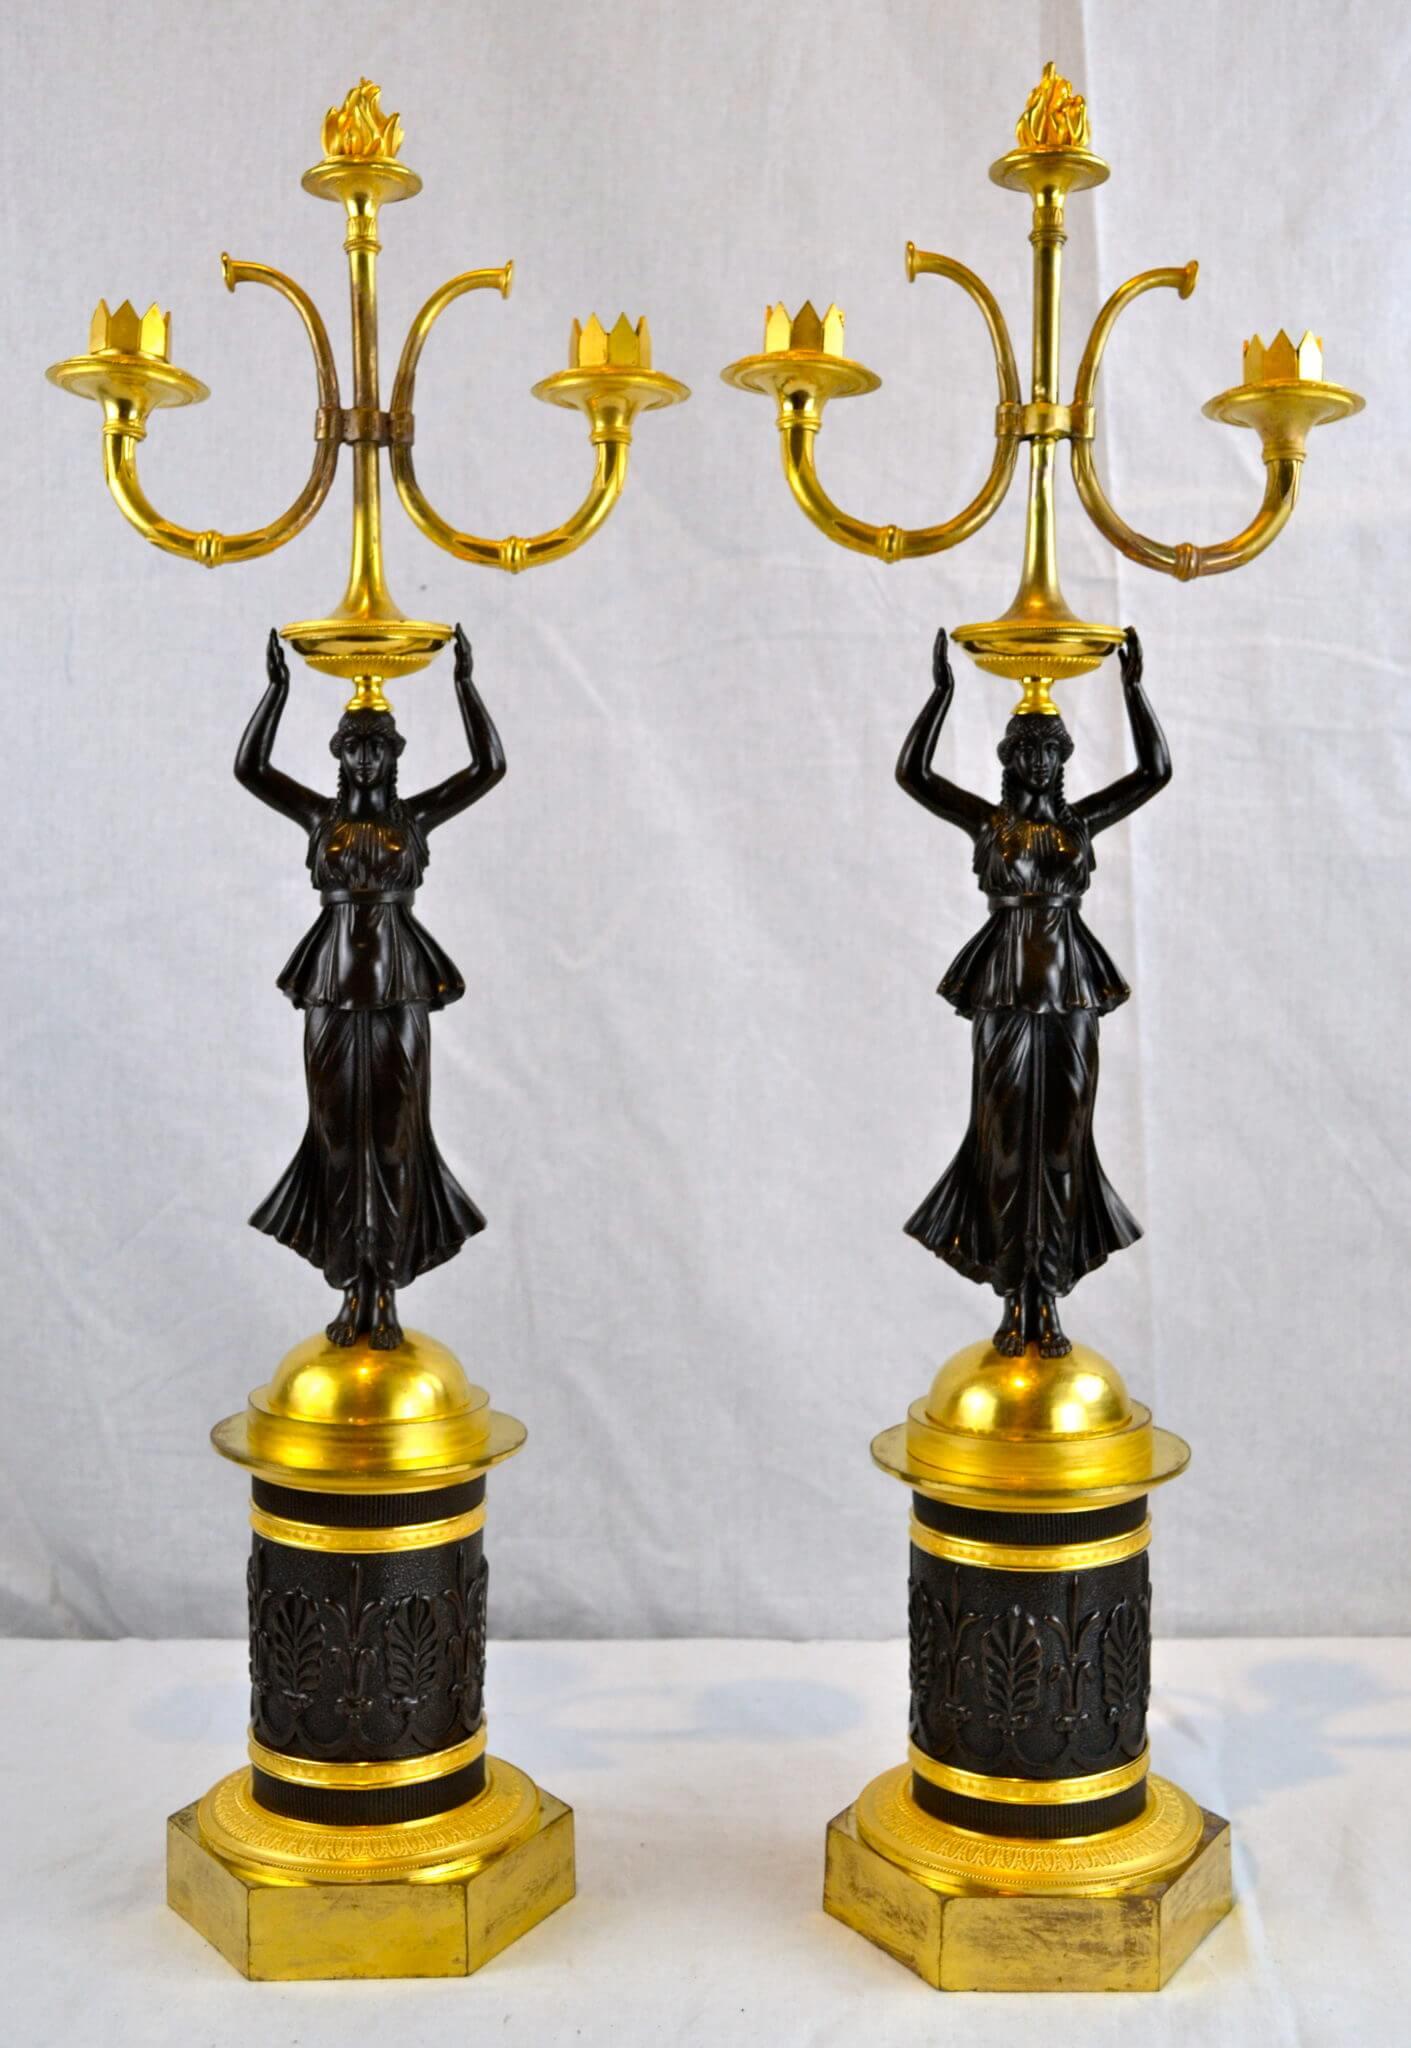 A pair of mid-19th century French Empire figural candelabra featuring a patinated bronze caryatid holding a gilt bronze urn, mounted with a torch atop her head. The whole raised on a gilt and patinated bronze domed columnar support, accented with